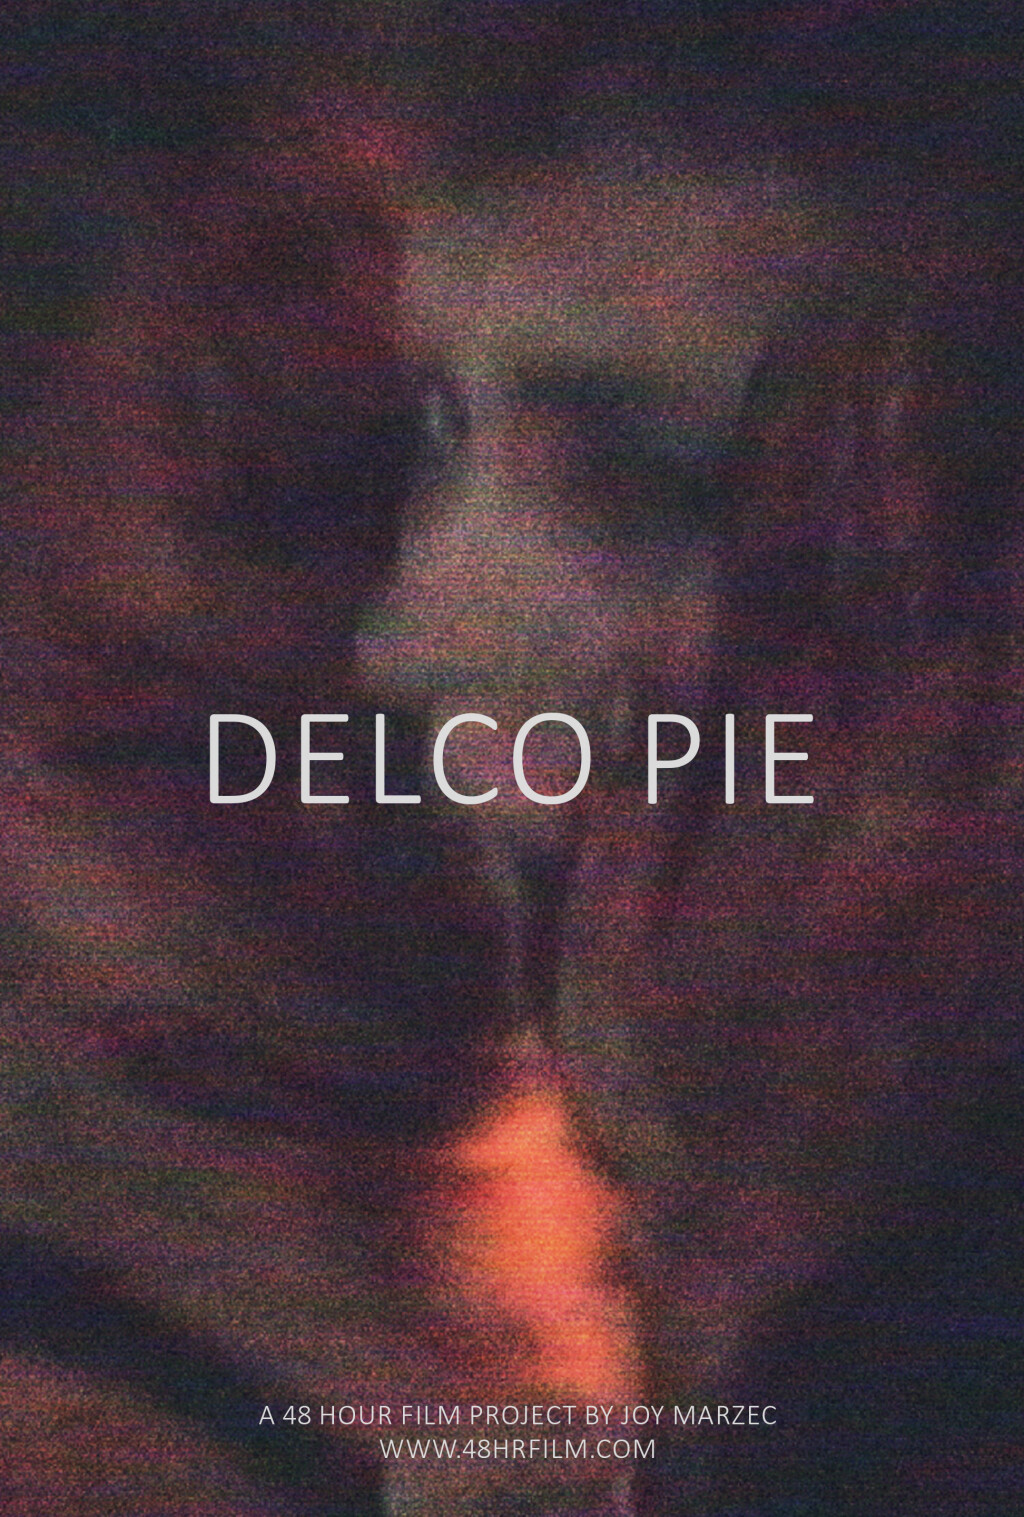 Filmposter for Delco Pie